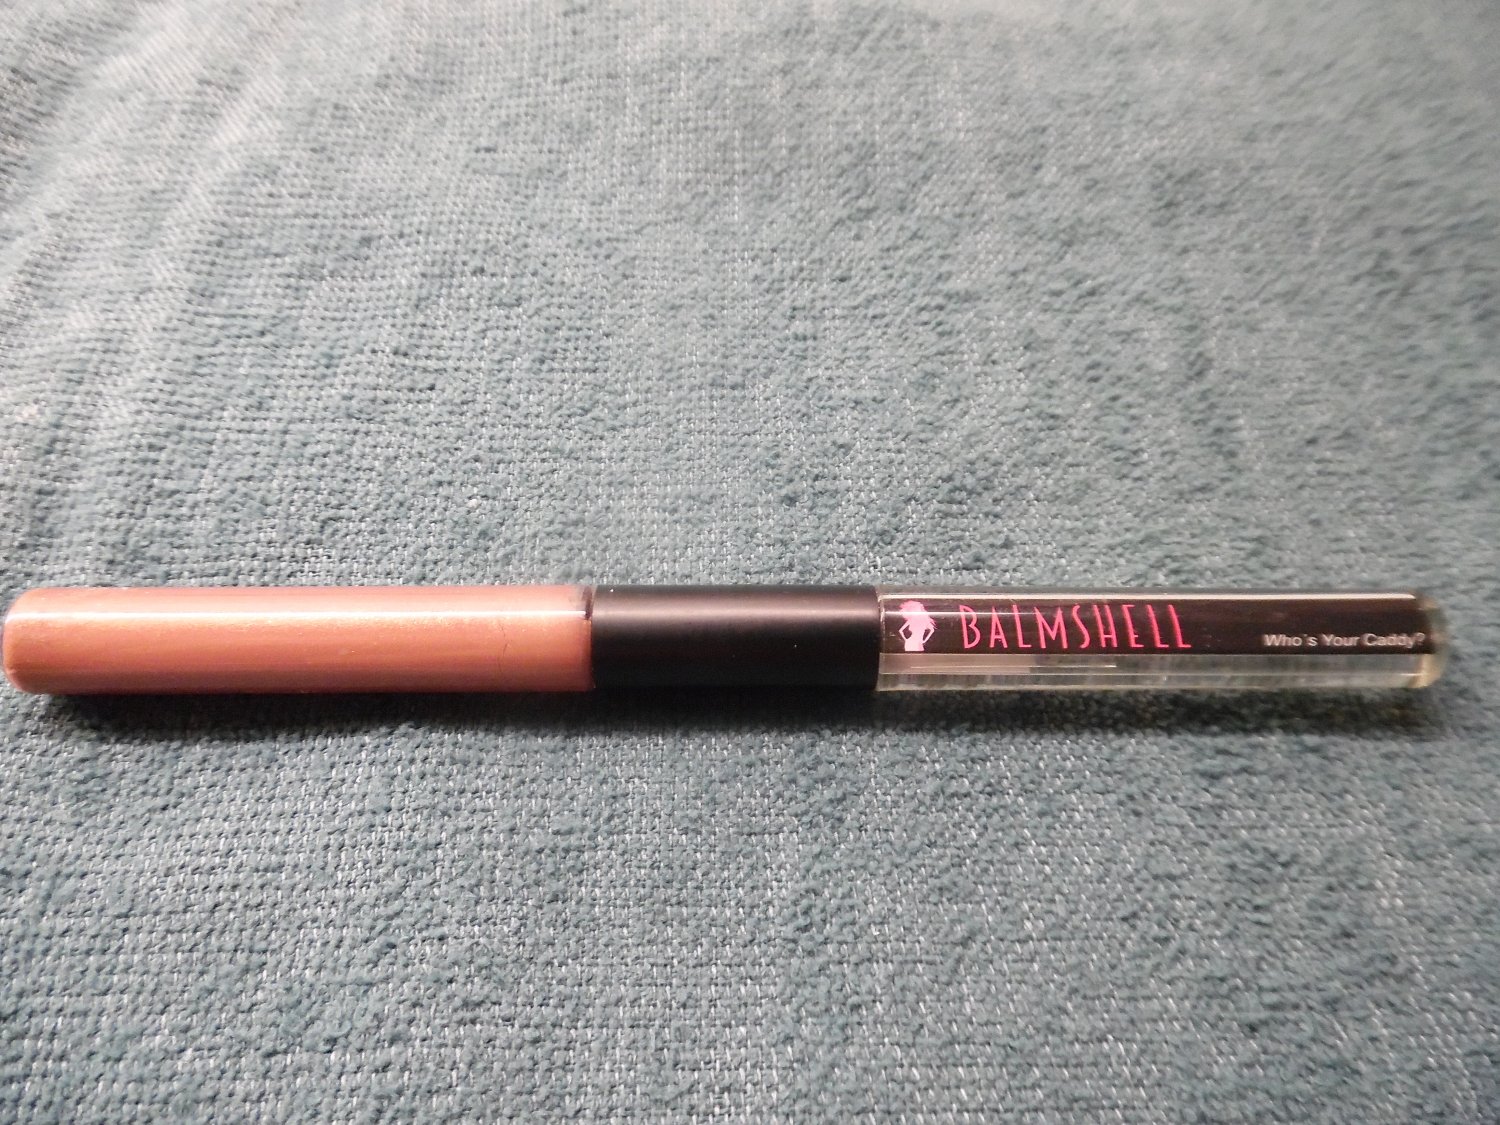 BALMSHELL LIP GLOSS - Who's Your Caddy? (Browned Plum With Golden Shimmer)